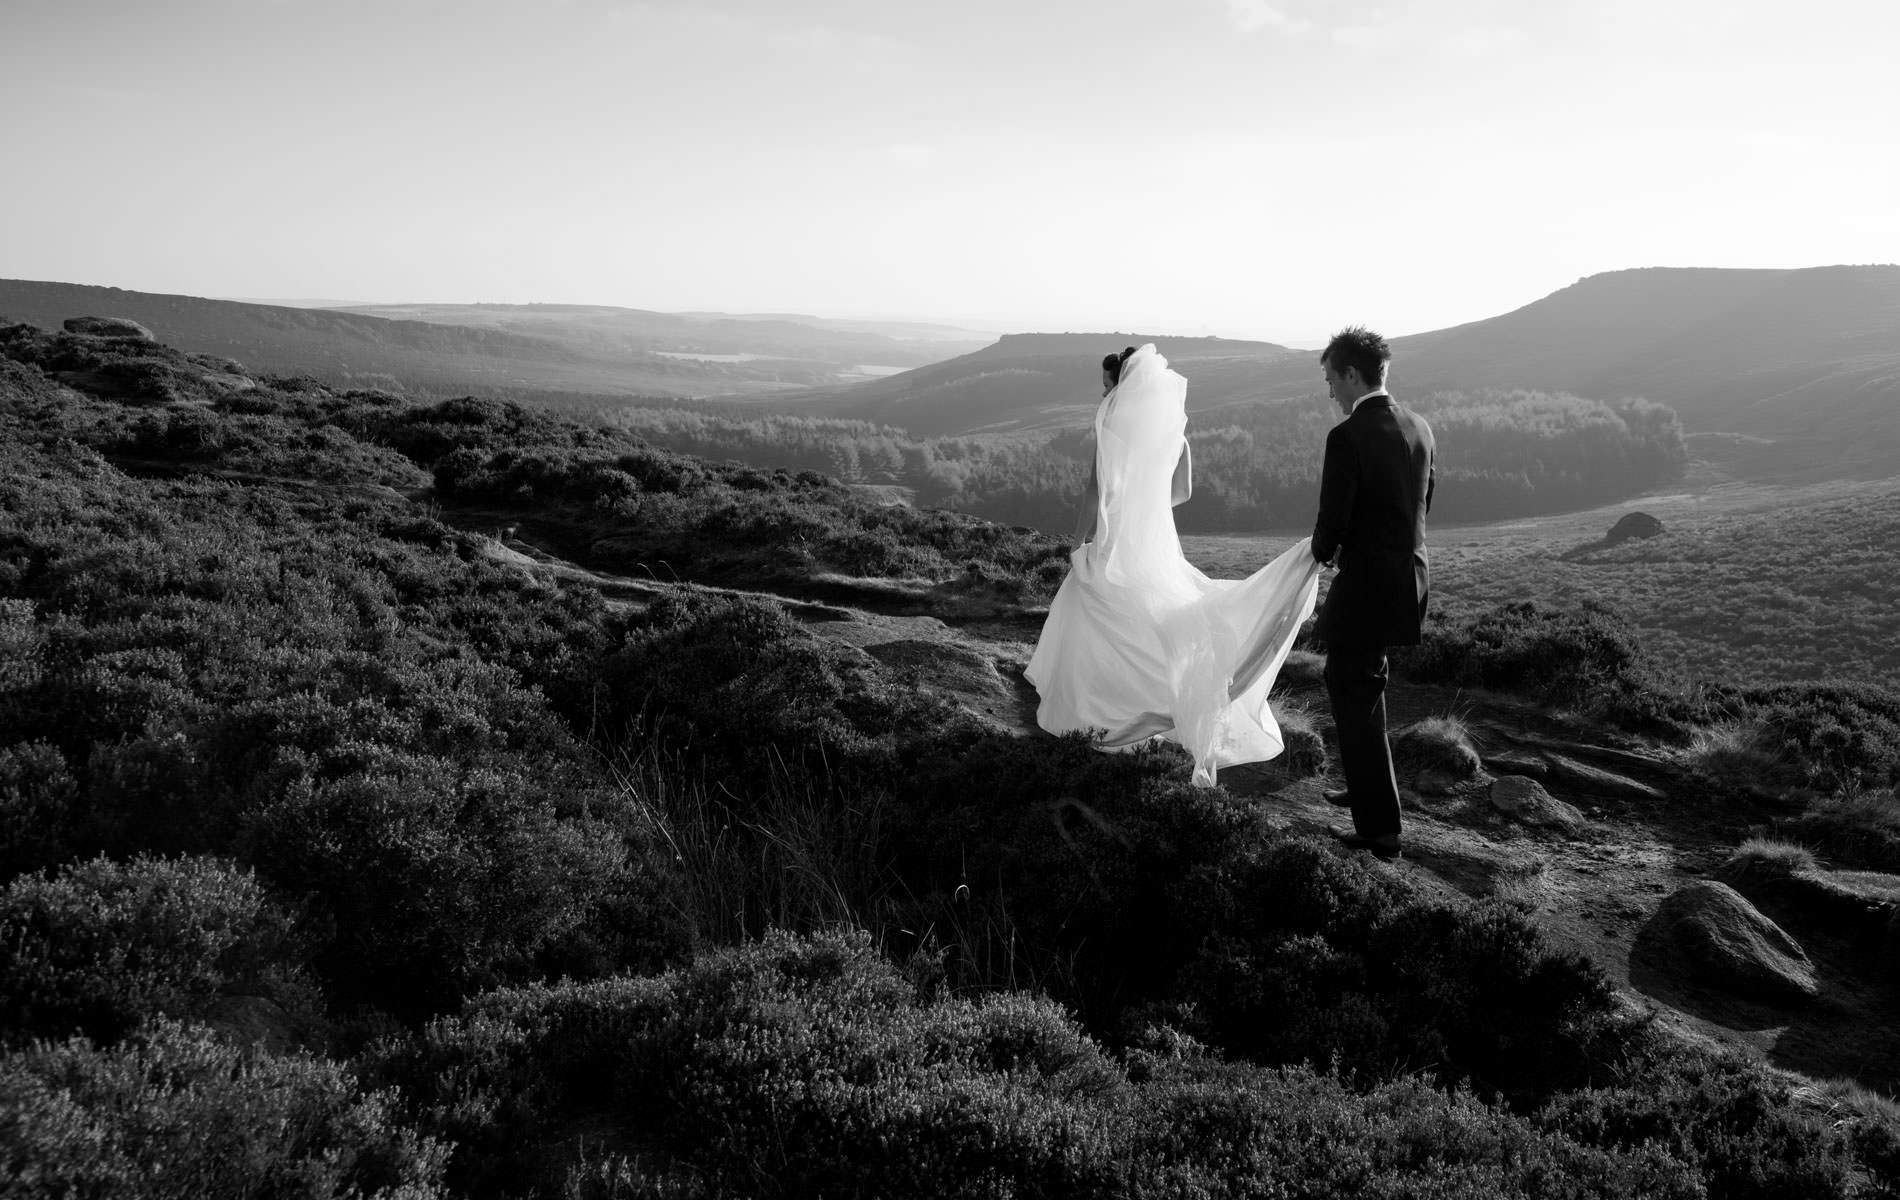 Wedding photographer Ashford snapping couple walking up hill rural groom holding train black and white